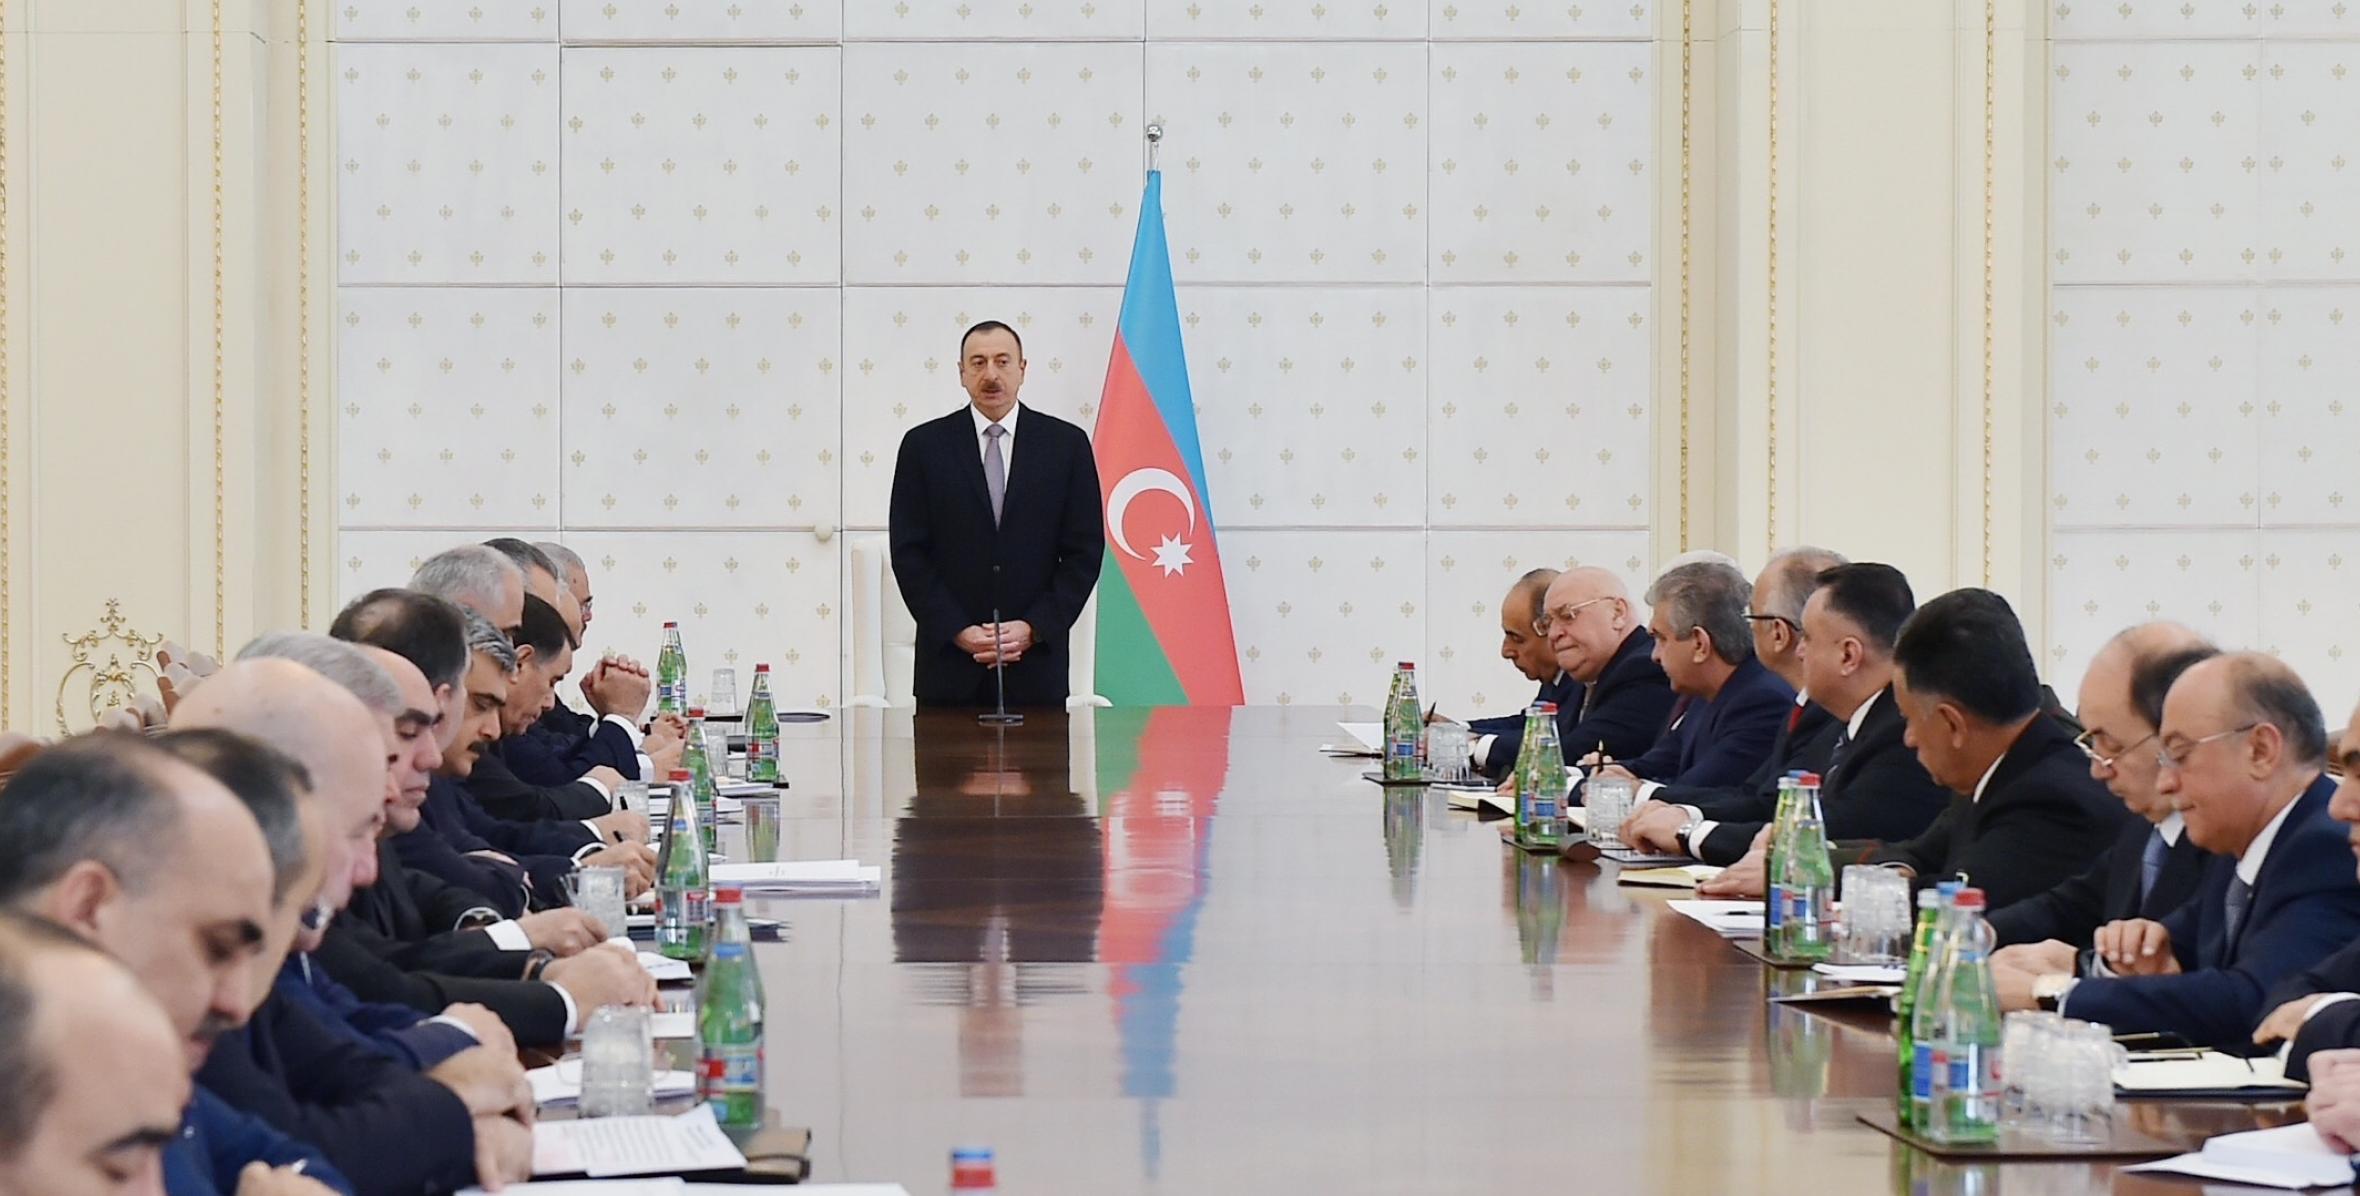 Ilham Aliyev chaired the meeting of the Cabinet of Ministers dedicated to the results of socioeconomic development in 2014 and objectives for 2015